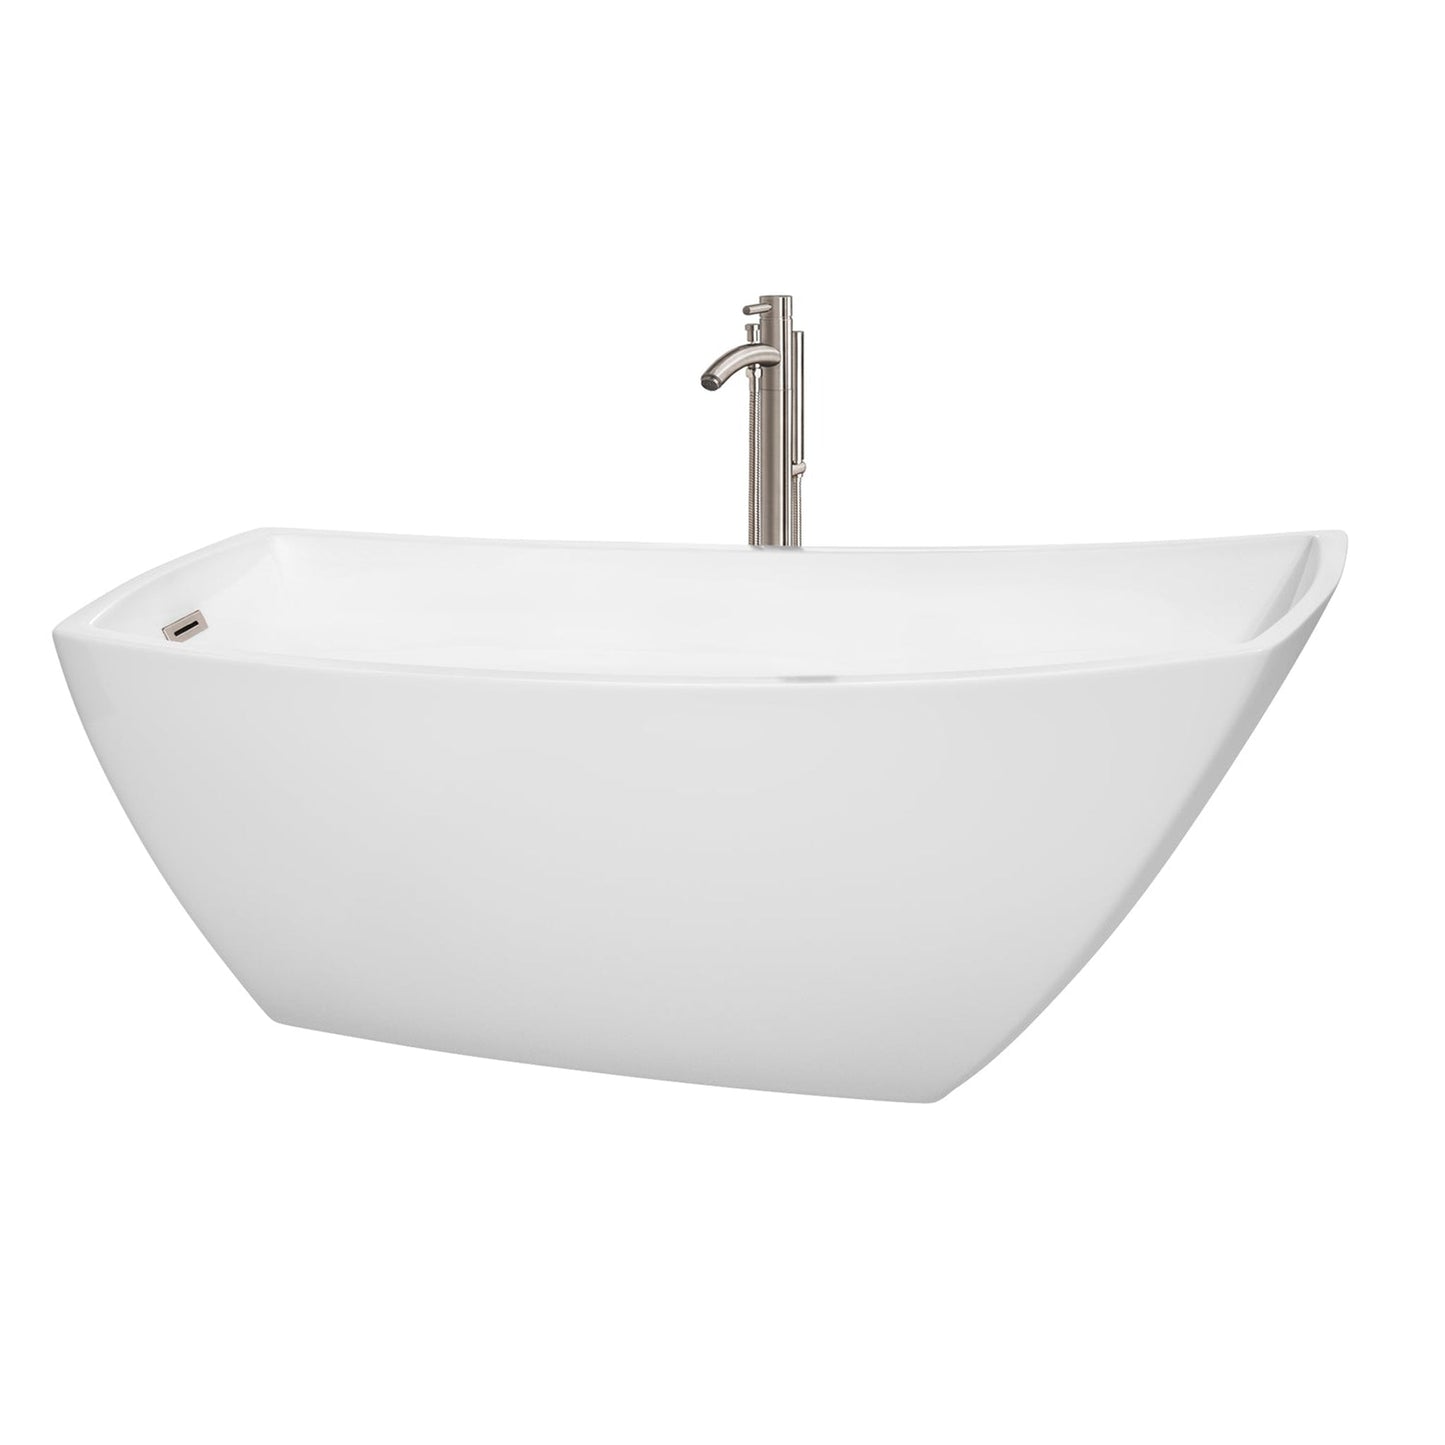 Wyndham Collection Antigua 67" Freestanding Bathtub in White With Matte Black Drain and Overflow Trim